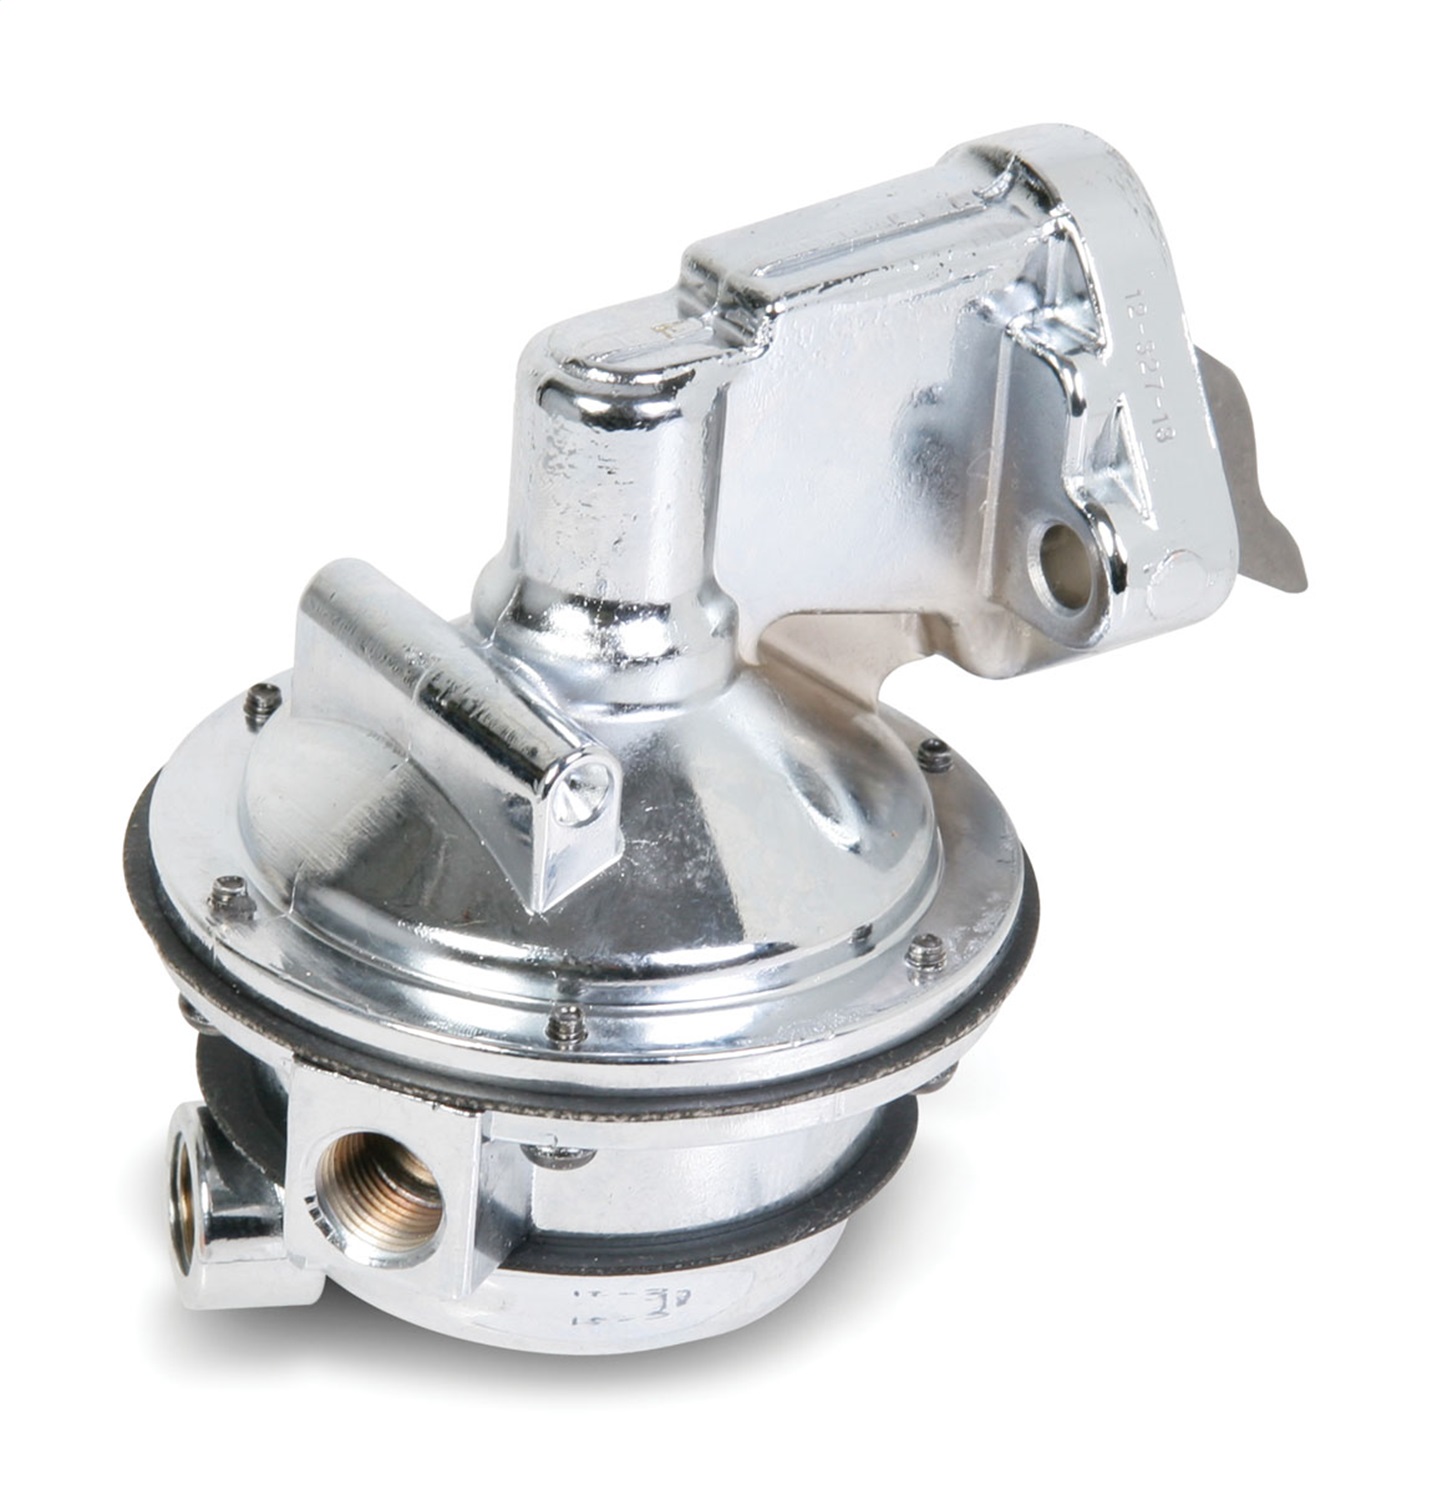 Holley Performance Holley Performance 12-327-13 Mechanical Fuel Pump